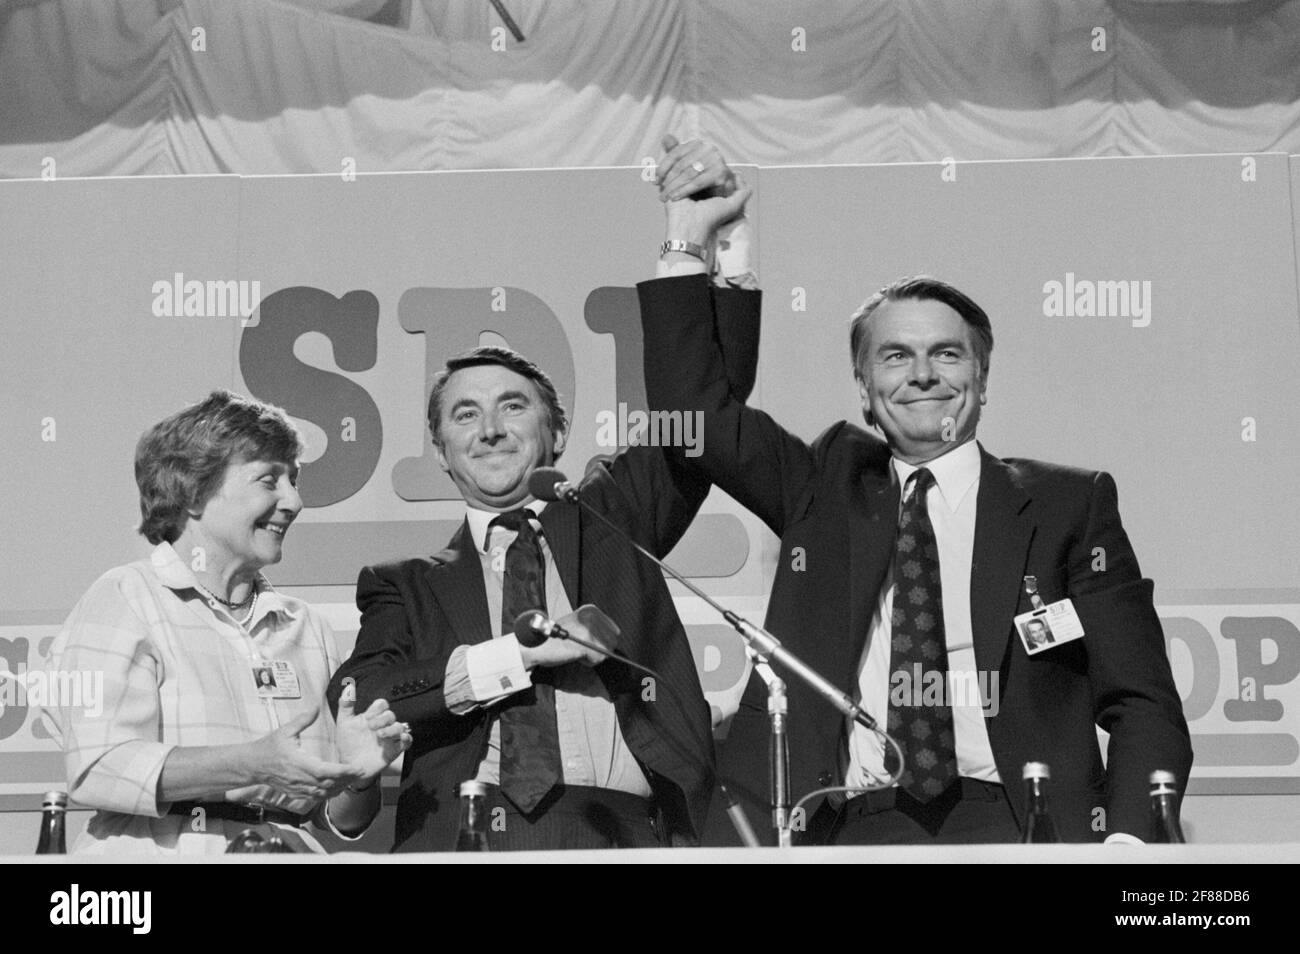 File photo dated 08/09/85 of Social Democratic Party President Shirley Williams applauding Liberal leader David Steel, who has joined hands with SDP leader Dr David Owen (left) after Mr Steel's speech to the SDP conference in Torquay. The former cabinet minister and Liberal Democrat peer, Baroness Williams of Crosby, has died aged 90, the Liberal Democrats have said. Issue date: Monday April 12, 2021. Stock Photo